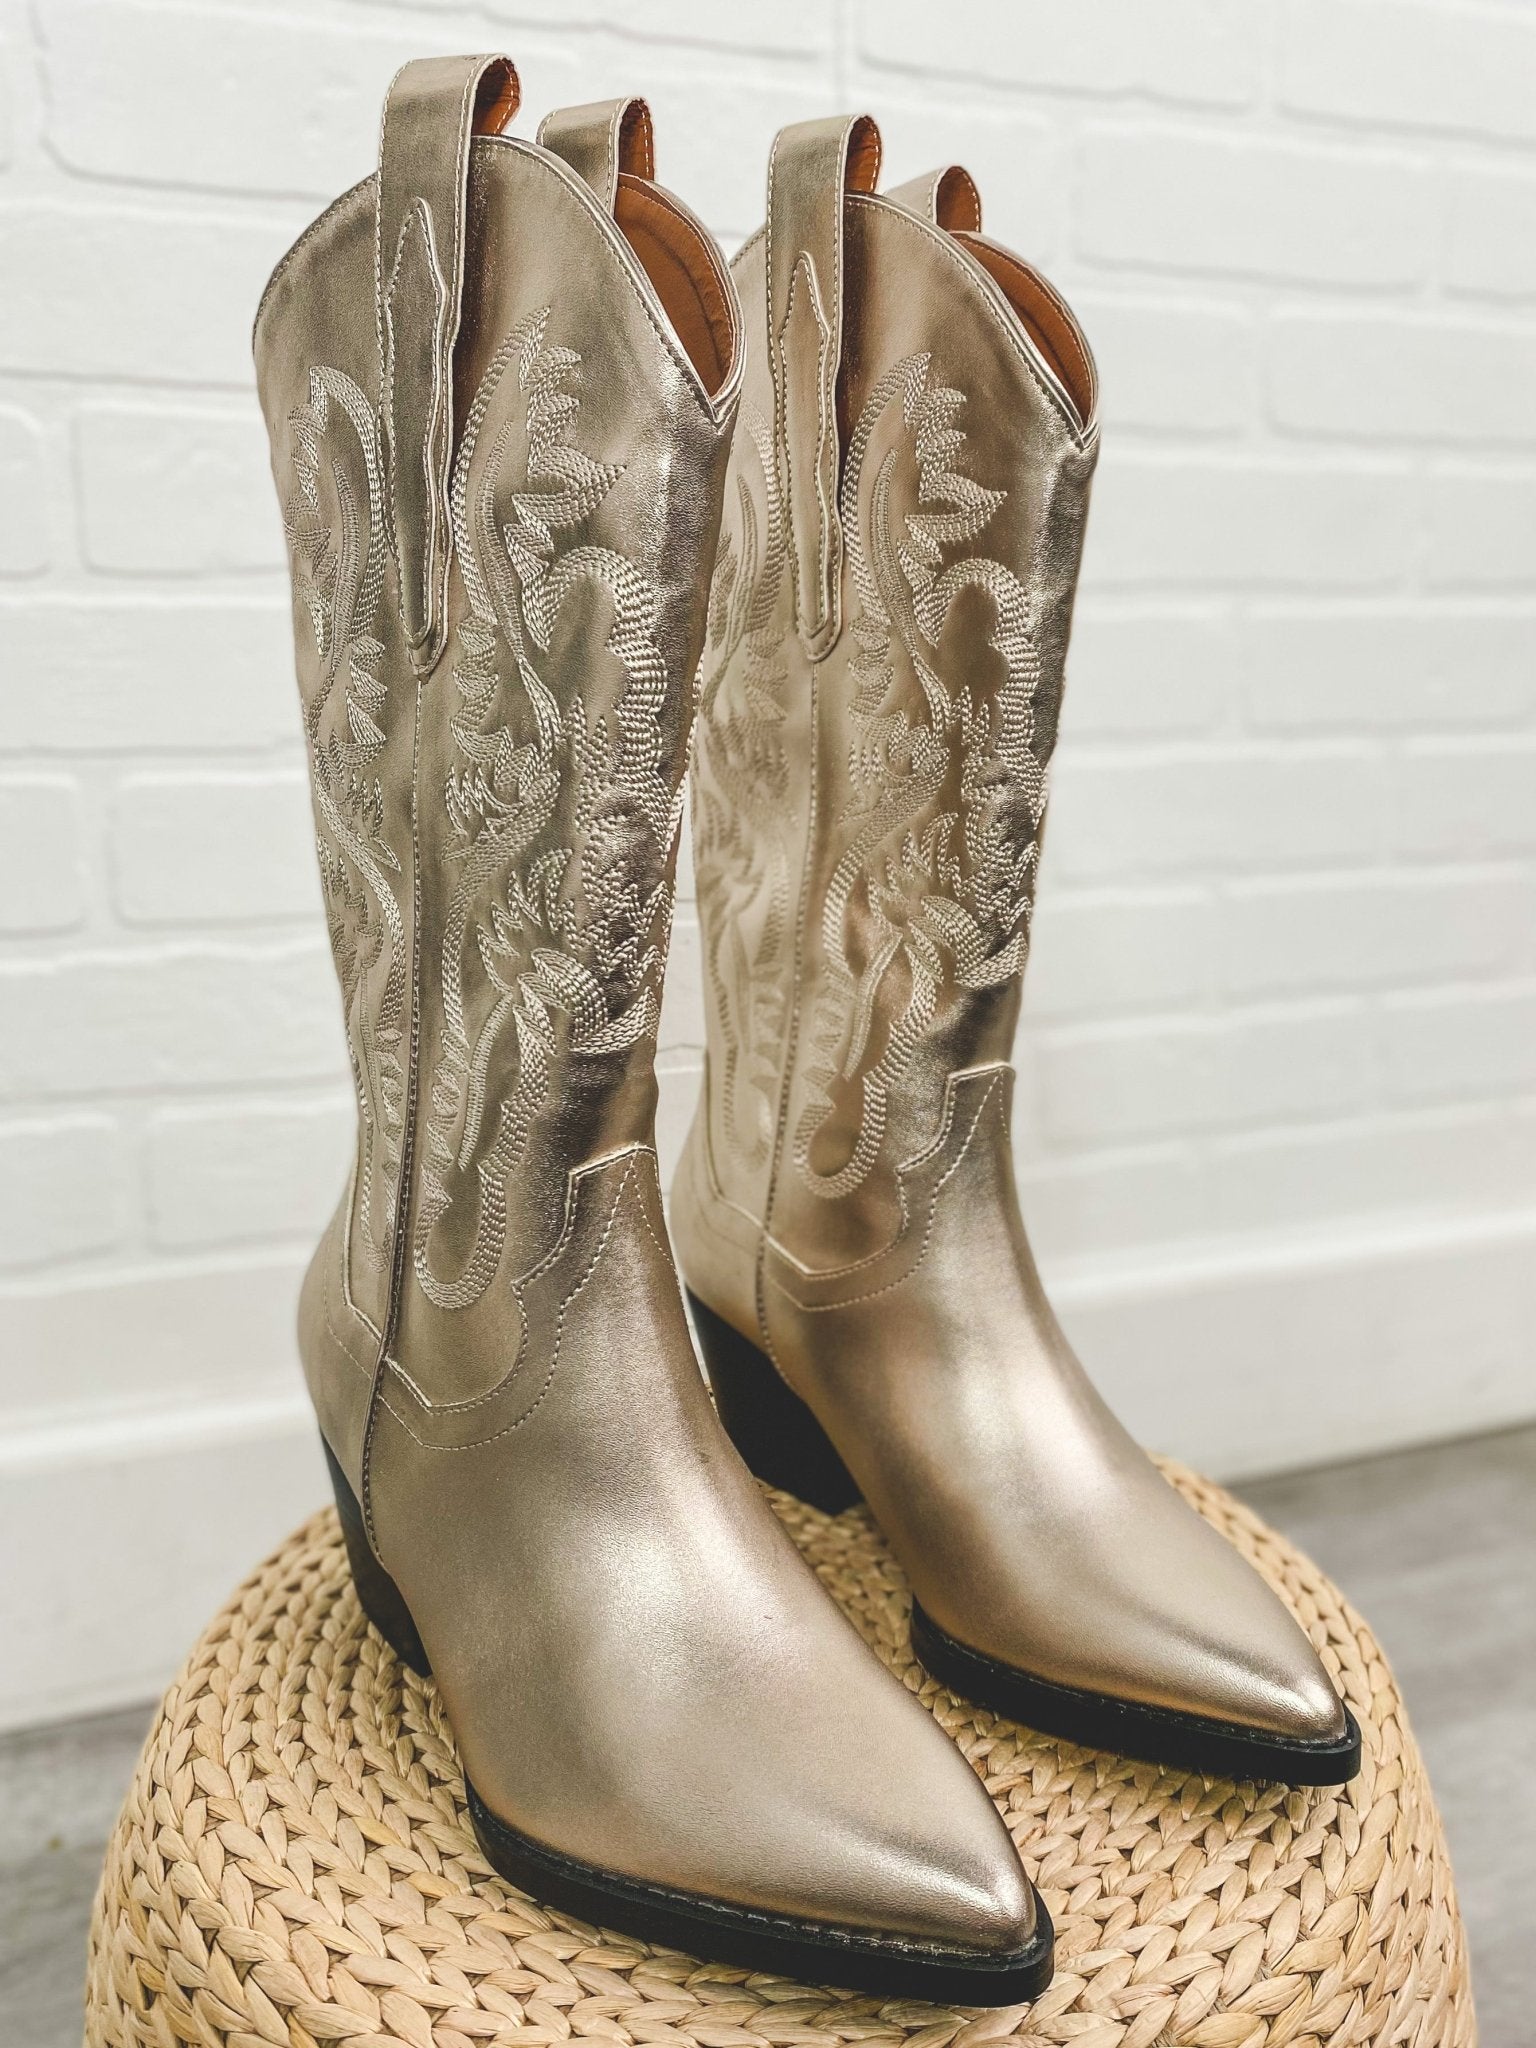 Amaya classic western boot champagne - Affordable Shoes - Boutique Shoes at Lush Fashion Lounge Boutique in Oklahoma City